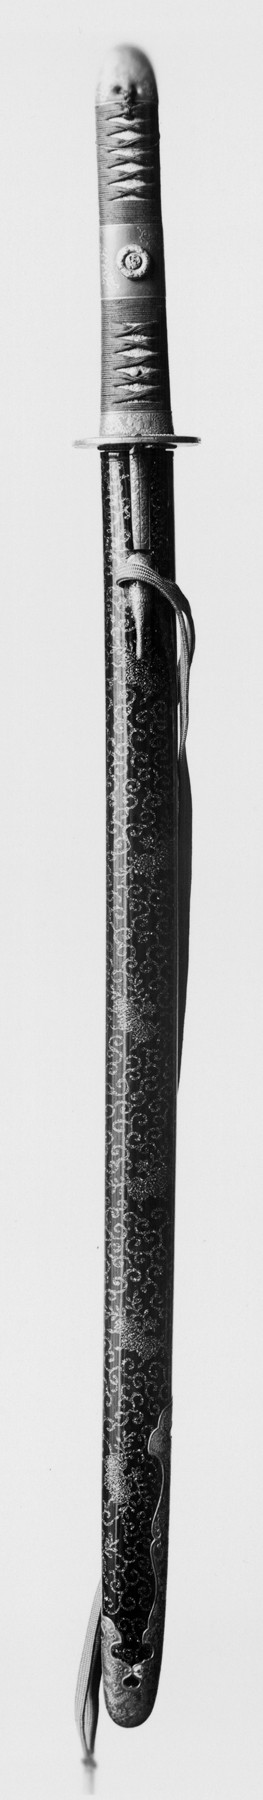 Long Sword with Abalone Confetti in Paulownia Design on the Sheath